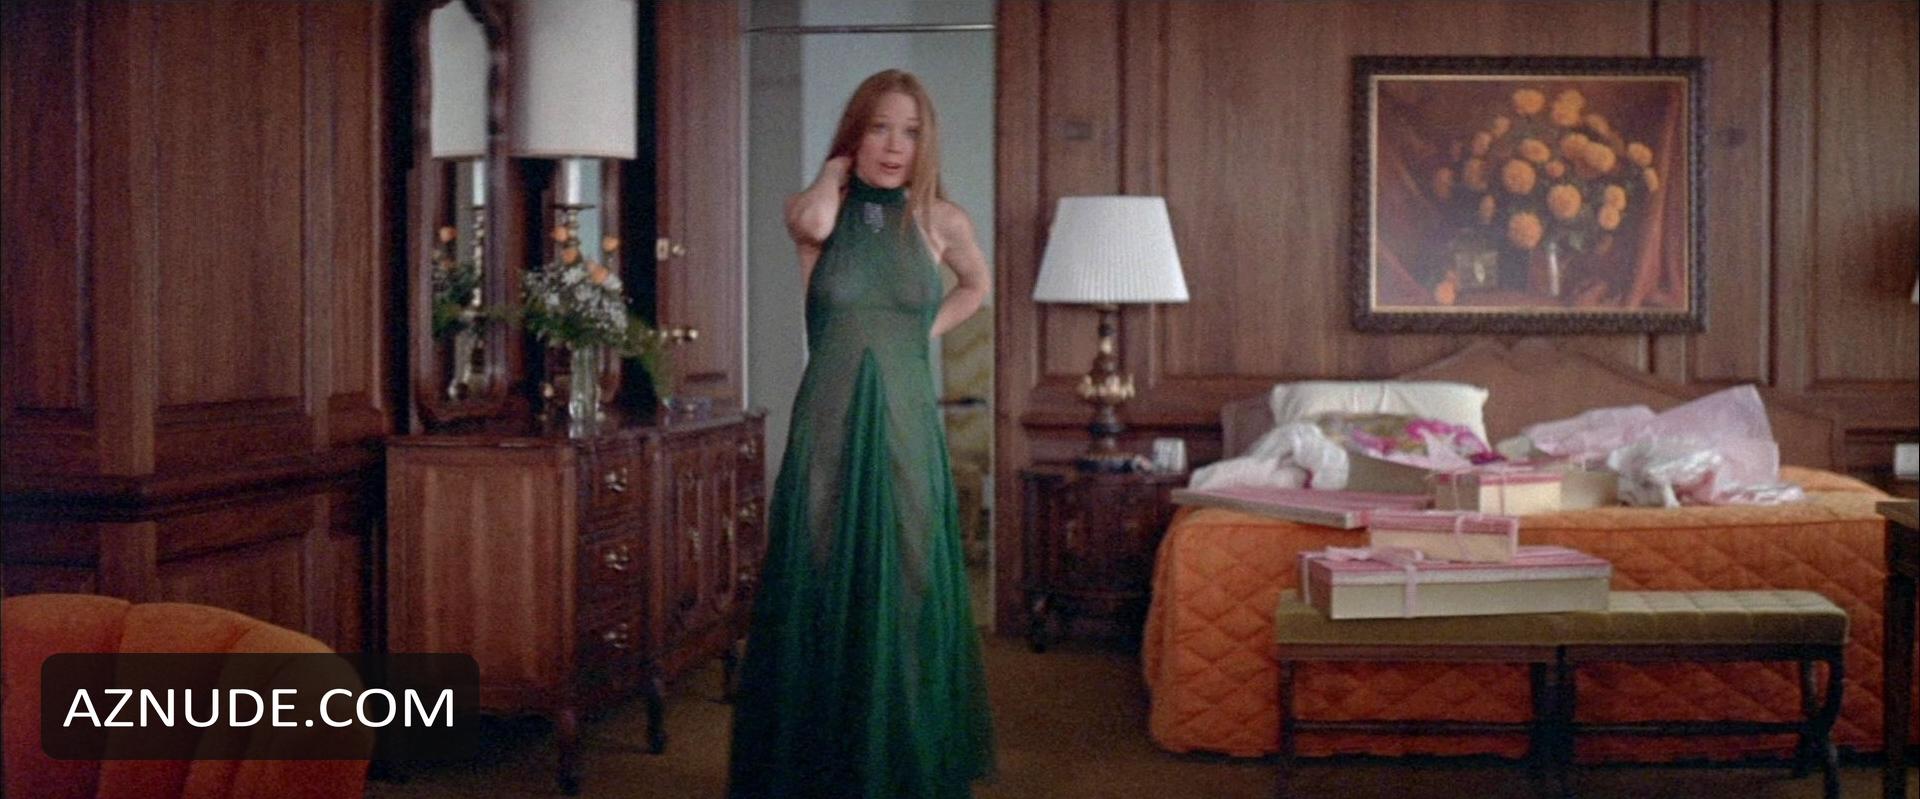 Browse Celebrity Sheer Dress Images Page 1 Aznude